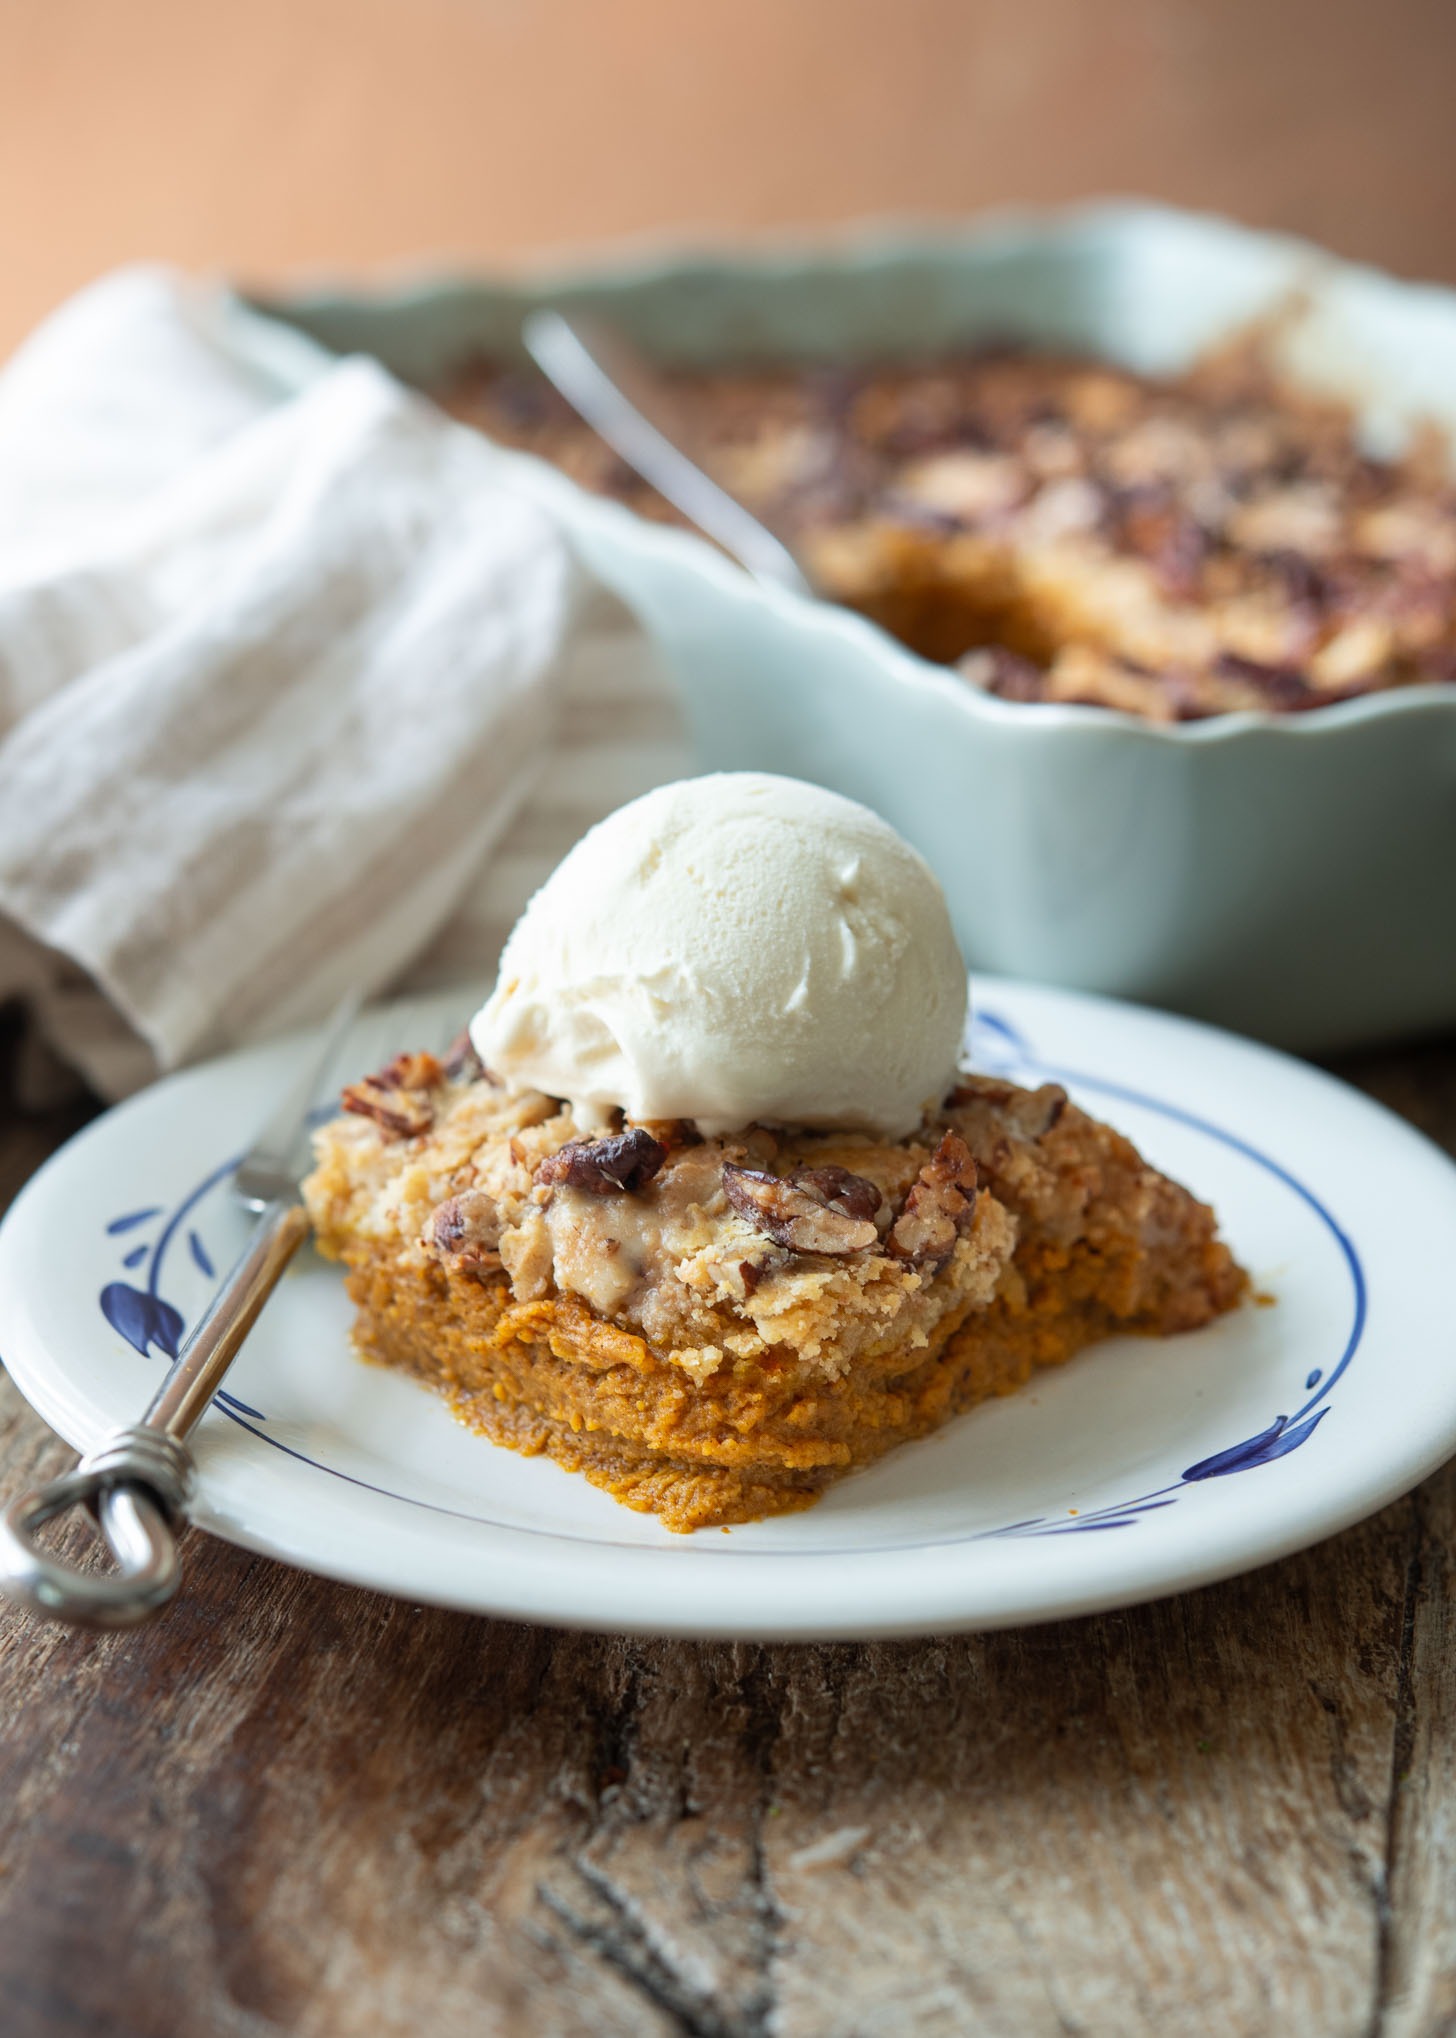 A slice of pumpkin pie crunch topped with ice cream on a dessert plate.